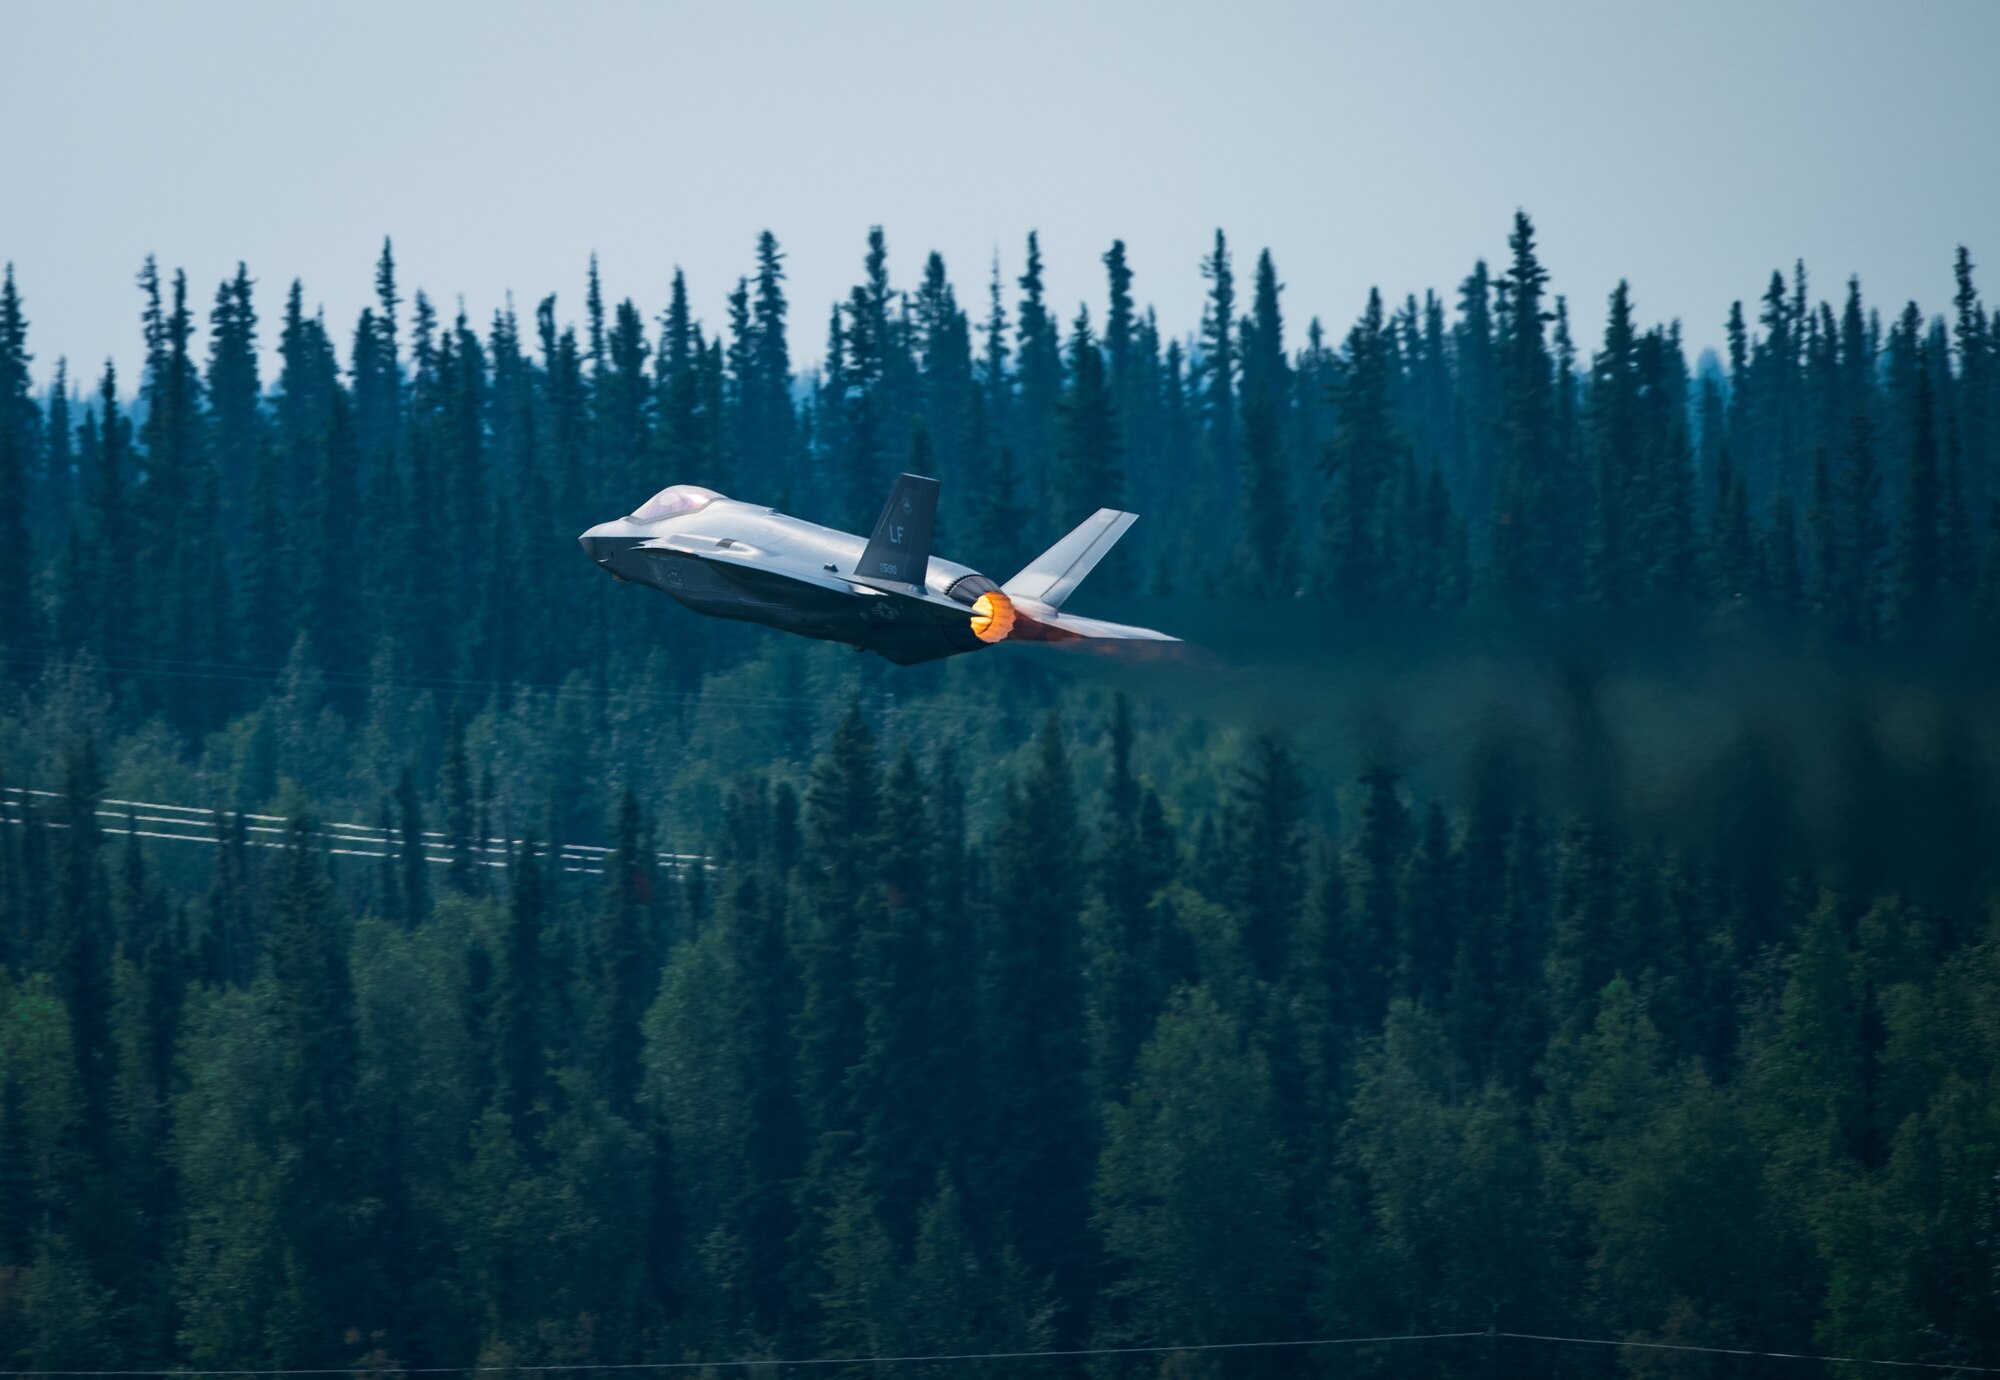 Capt. Andrew “Dojo” Olson, F-35 Demonstration Team pilot and commander takes off in an F-35A Lightning II during the Arctic Lightning Airshow July 13, 2019, at Eielson Air Force Base, Alaska. Using all 43,000 pounds of thrust, the F-35 Demonstration begins with a maximum power take off into a vertical climb. (U.S. Air Force photo by Senior Airman Alexander Cook)